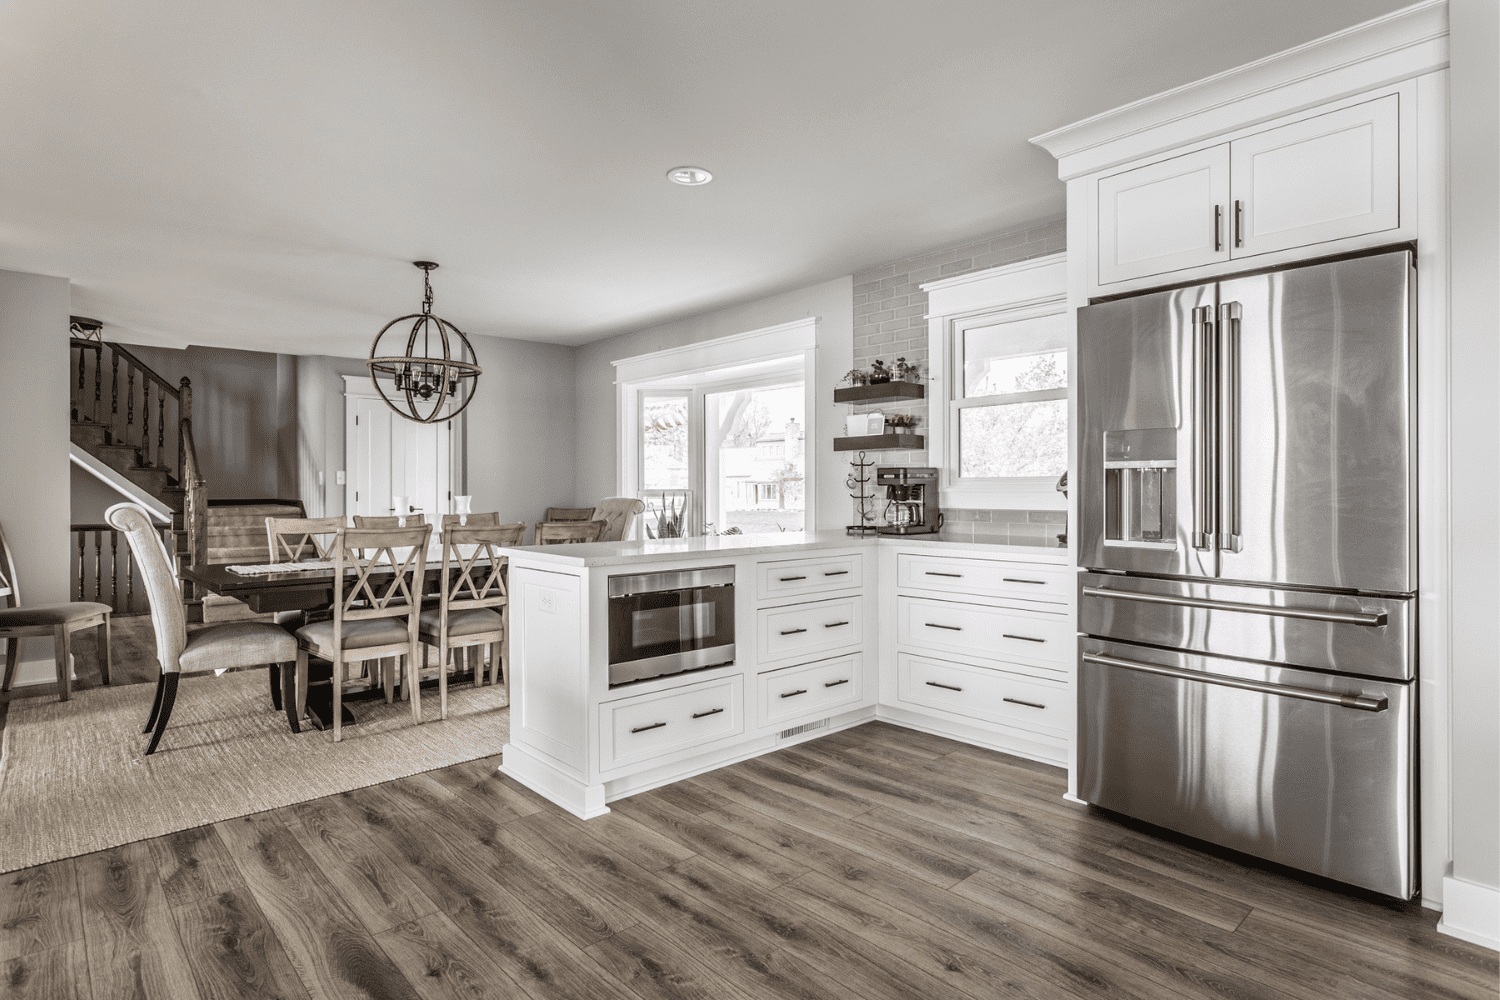 Nicholas Design Build | A kitchen with hardwood floors and stainless steel appliances.